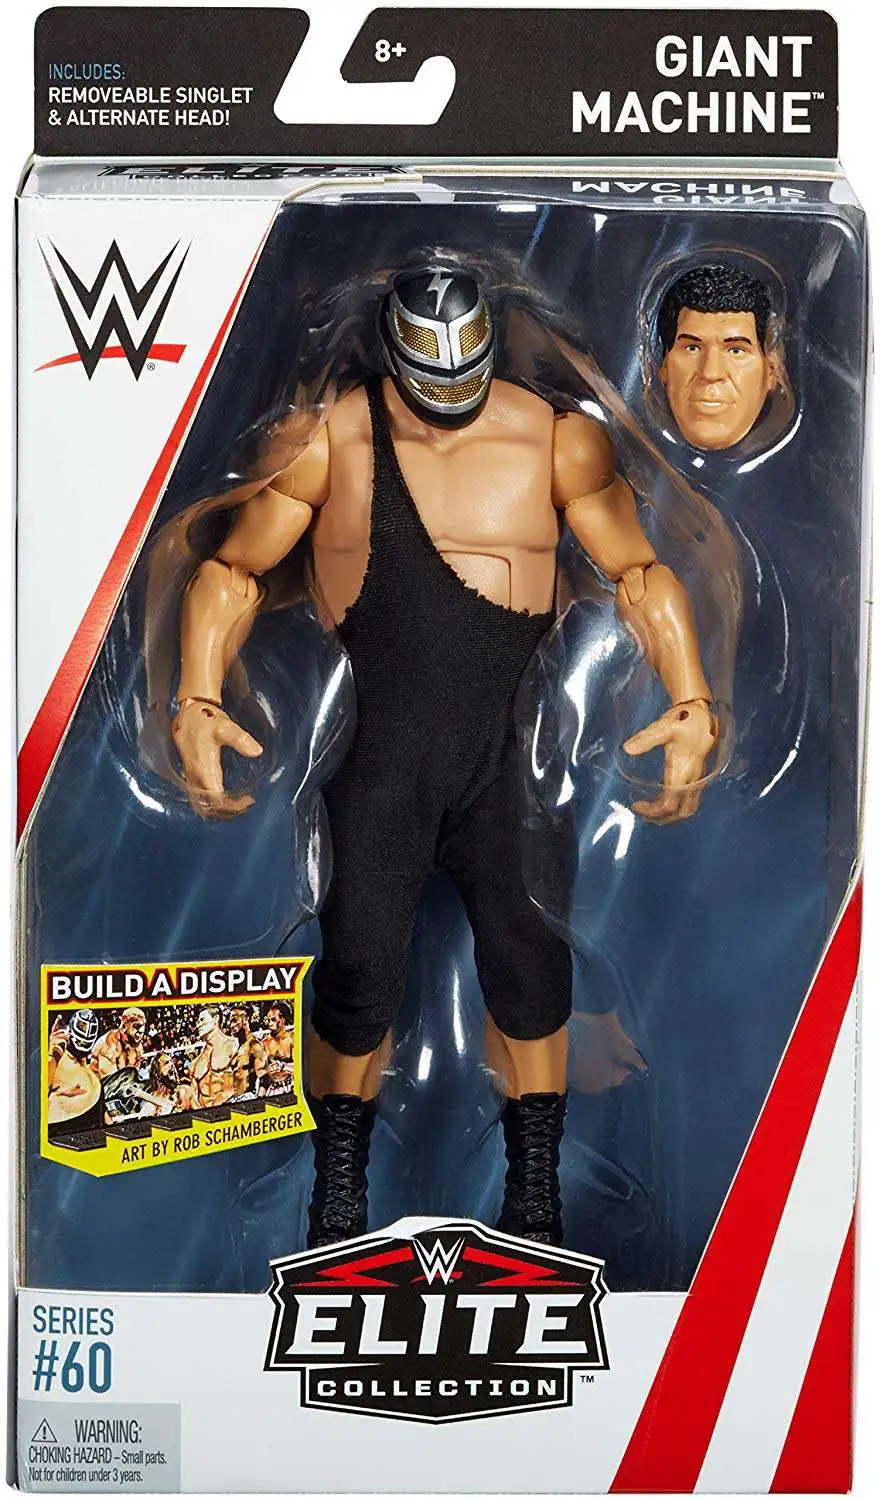 Wwe Wrestling Elite Collection Series 60 Giant Machine 7 Action Figure Removeable Singlet